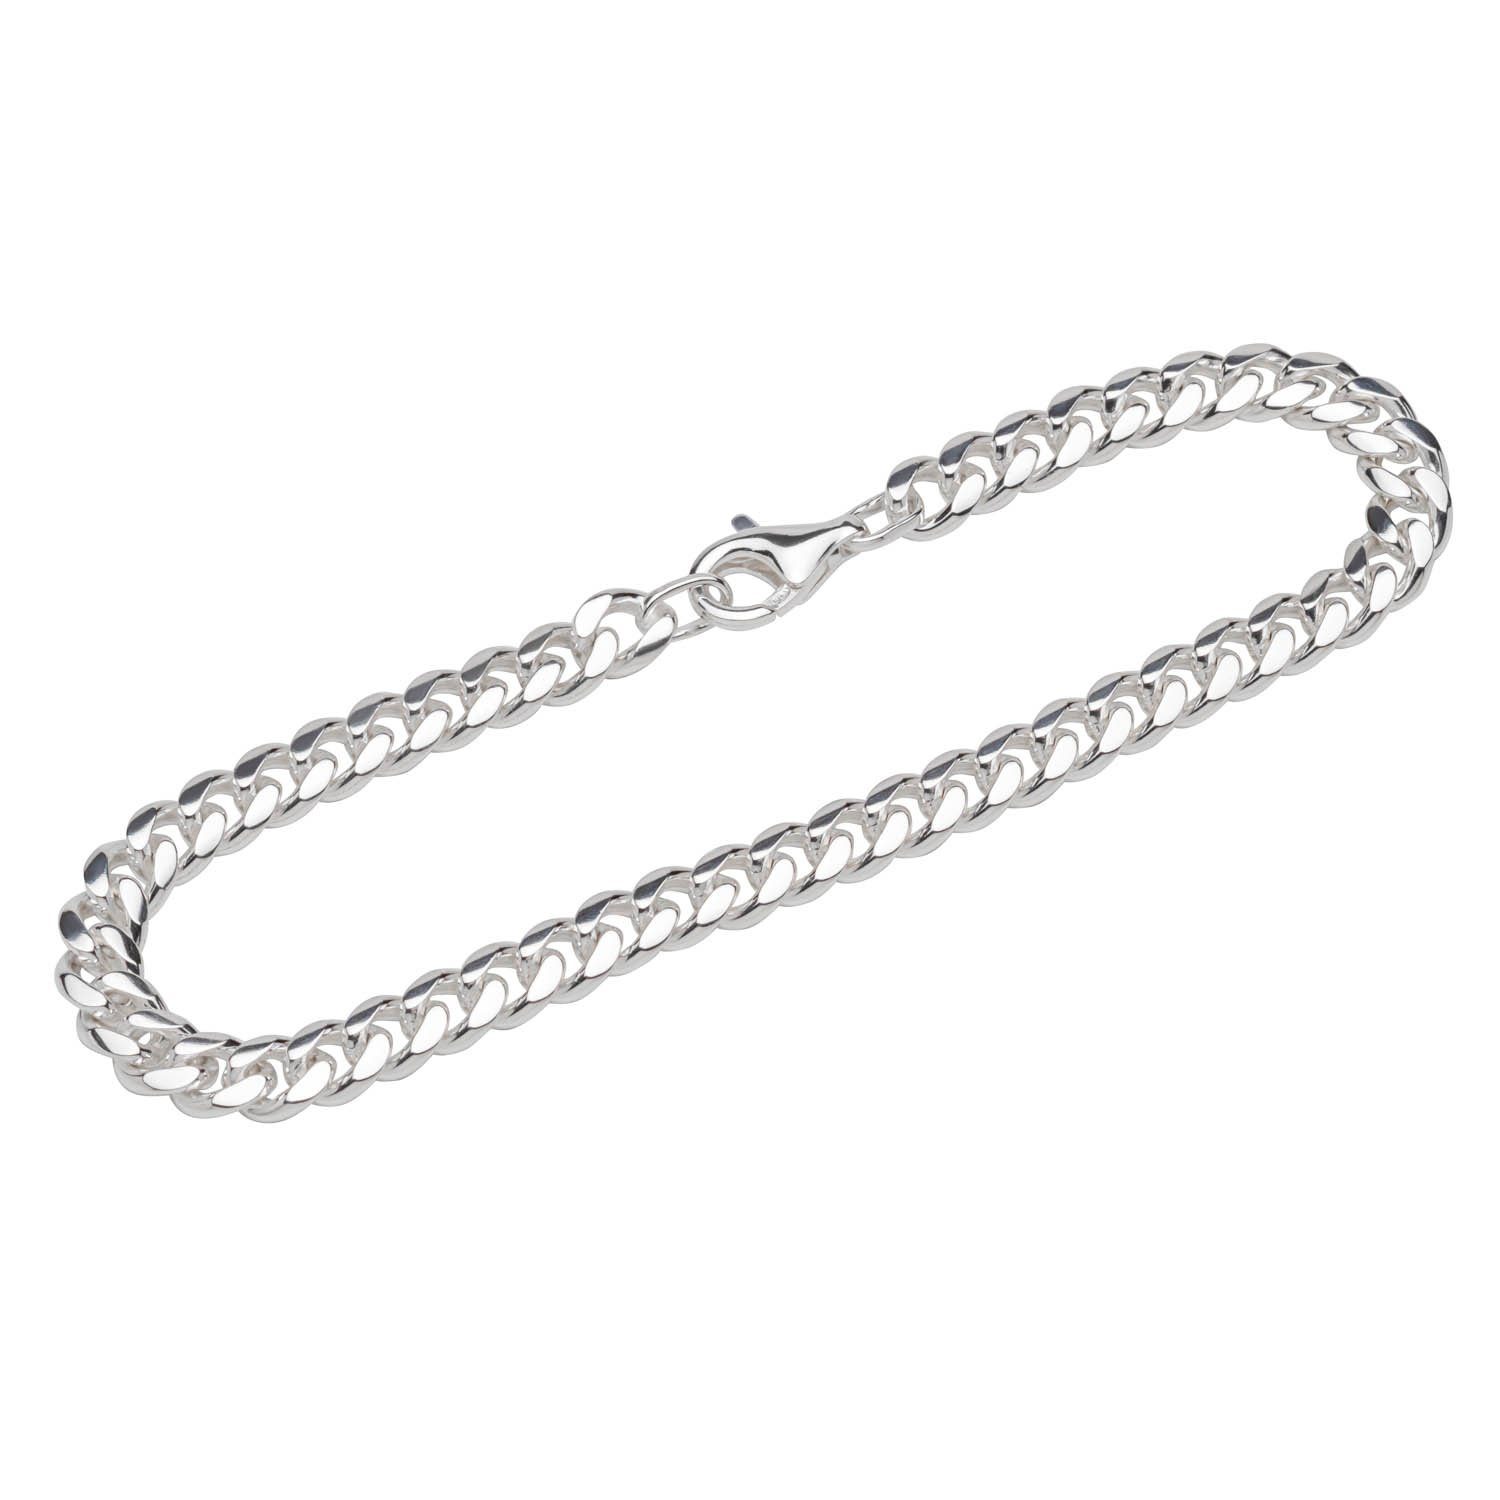 NKlaus Silberarmband Armband 925 oval Silber in Stück), (1 Made Sterling Panzerkette Germany 22cm